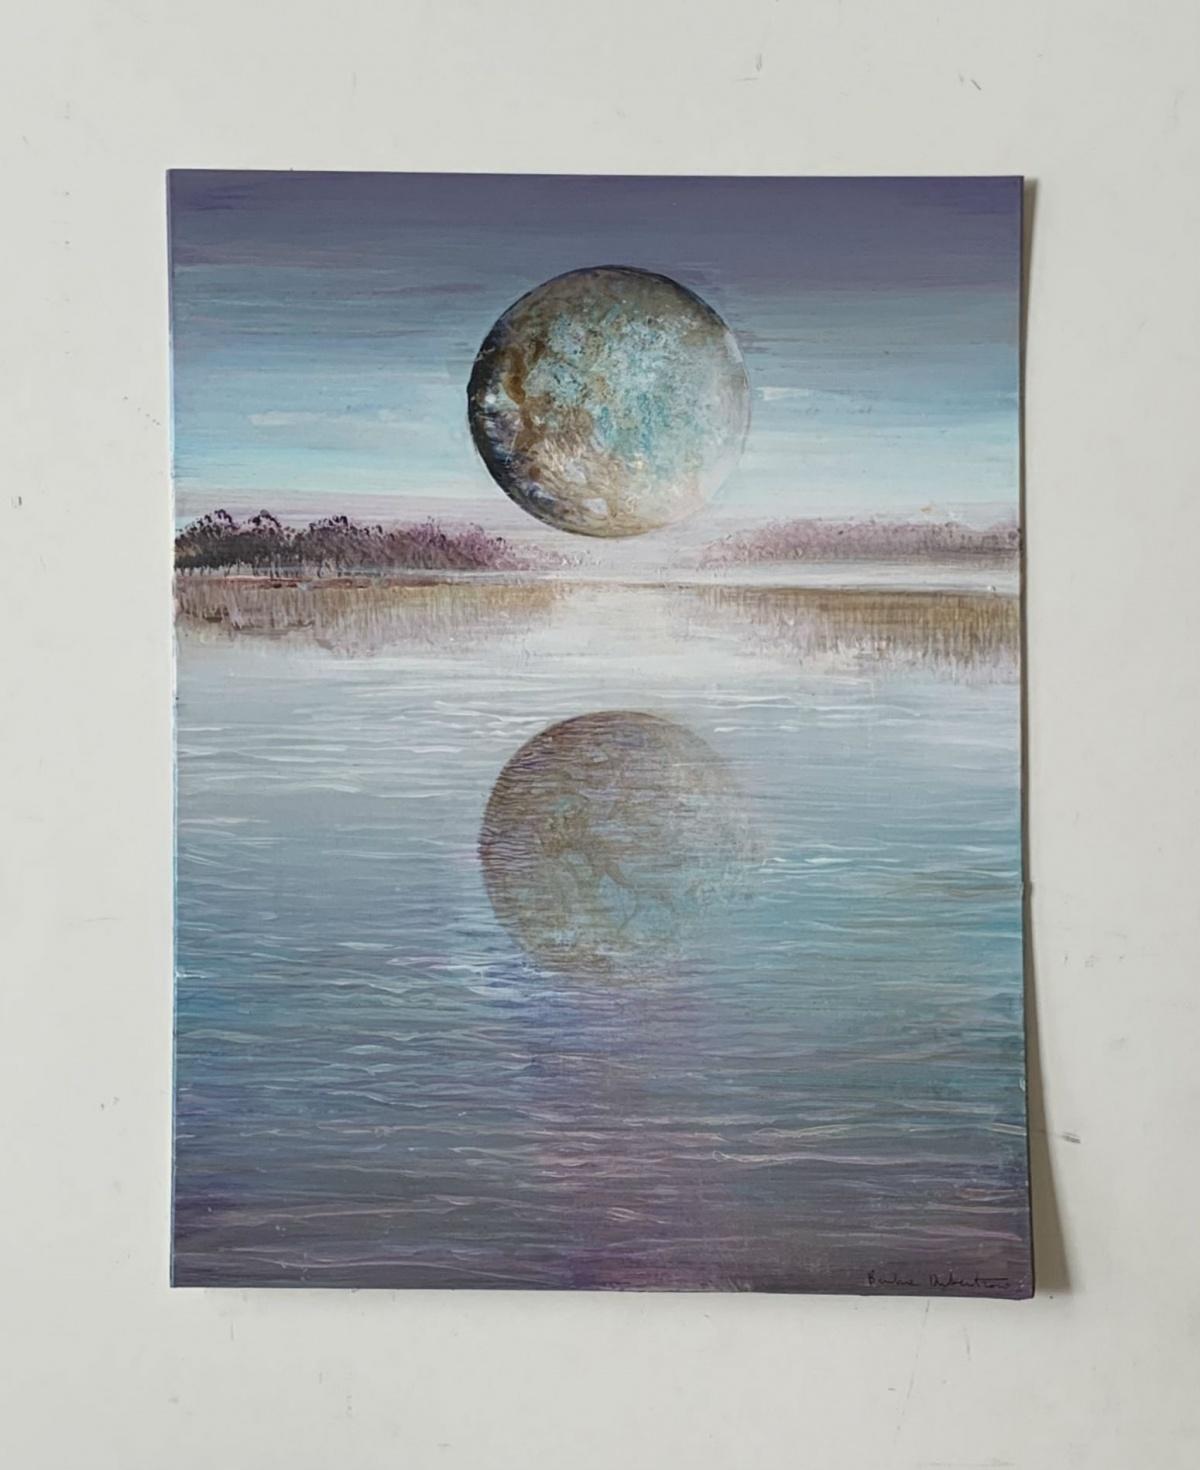 Contemporary figurative acrylic on cardboard painting by Polish artist Barbara Hubert. Painting depicts landscape or rather waterscape with full moon reflecting in the water. Colors are soft, pastel blues and violets. Artwork is signed on the right